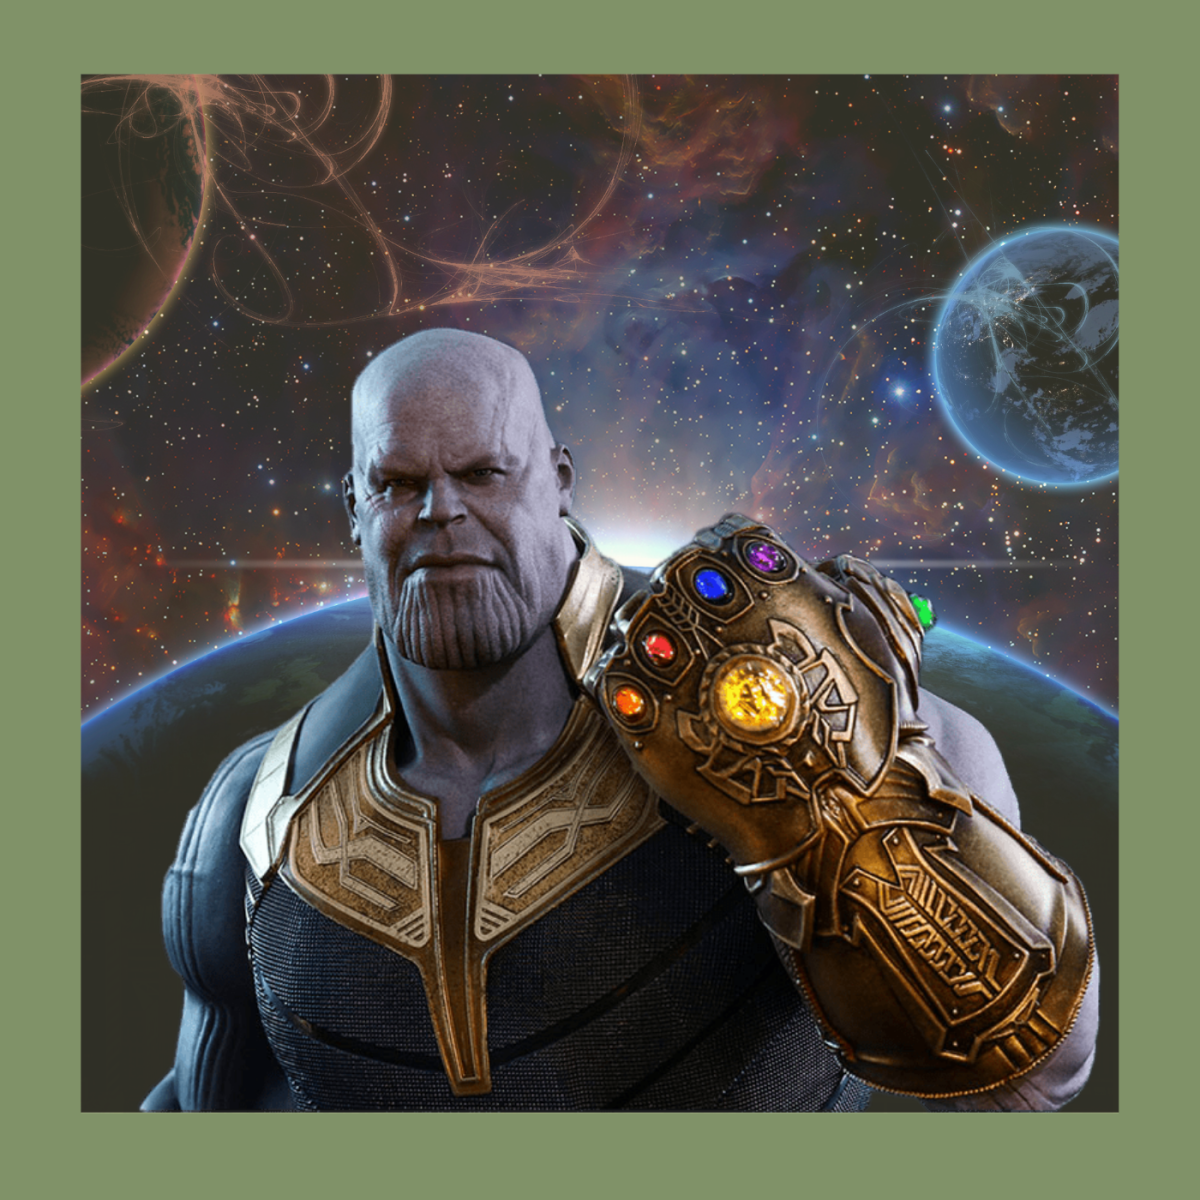 The Snap is the event when Thanos use the Infinity Gauntlet to terminate 50% of all life in the universe in 2018. The Blip, on the other hand, is when  Professor Hulk uses the Nano Gauntlet in 2023 to and bring back all the victims of Thanos' snap.